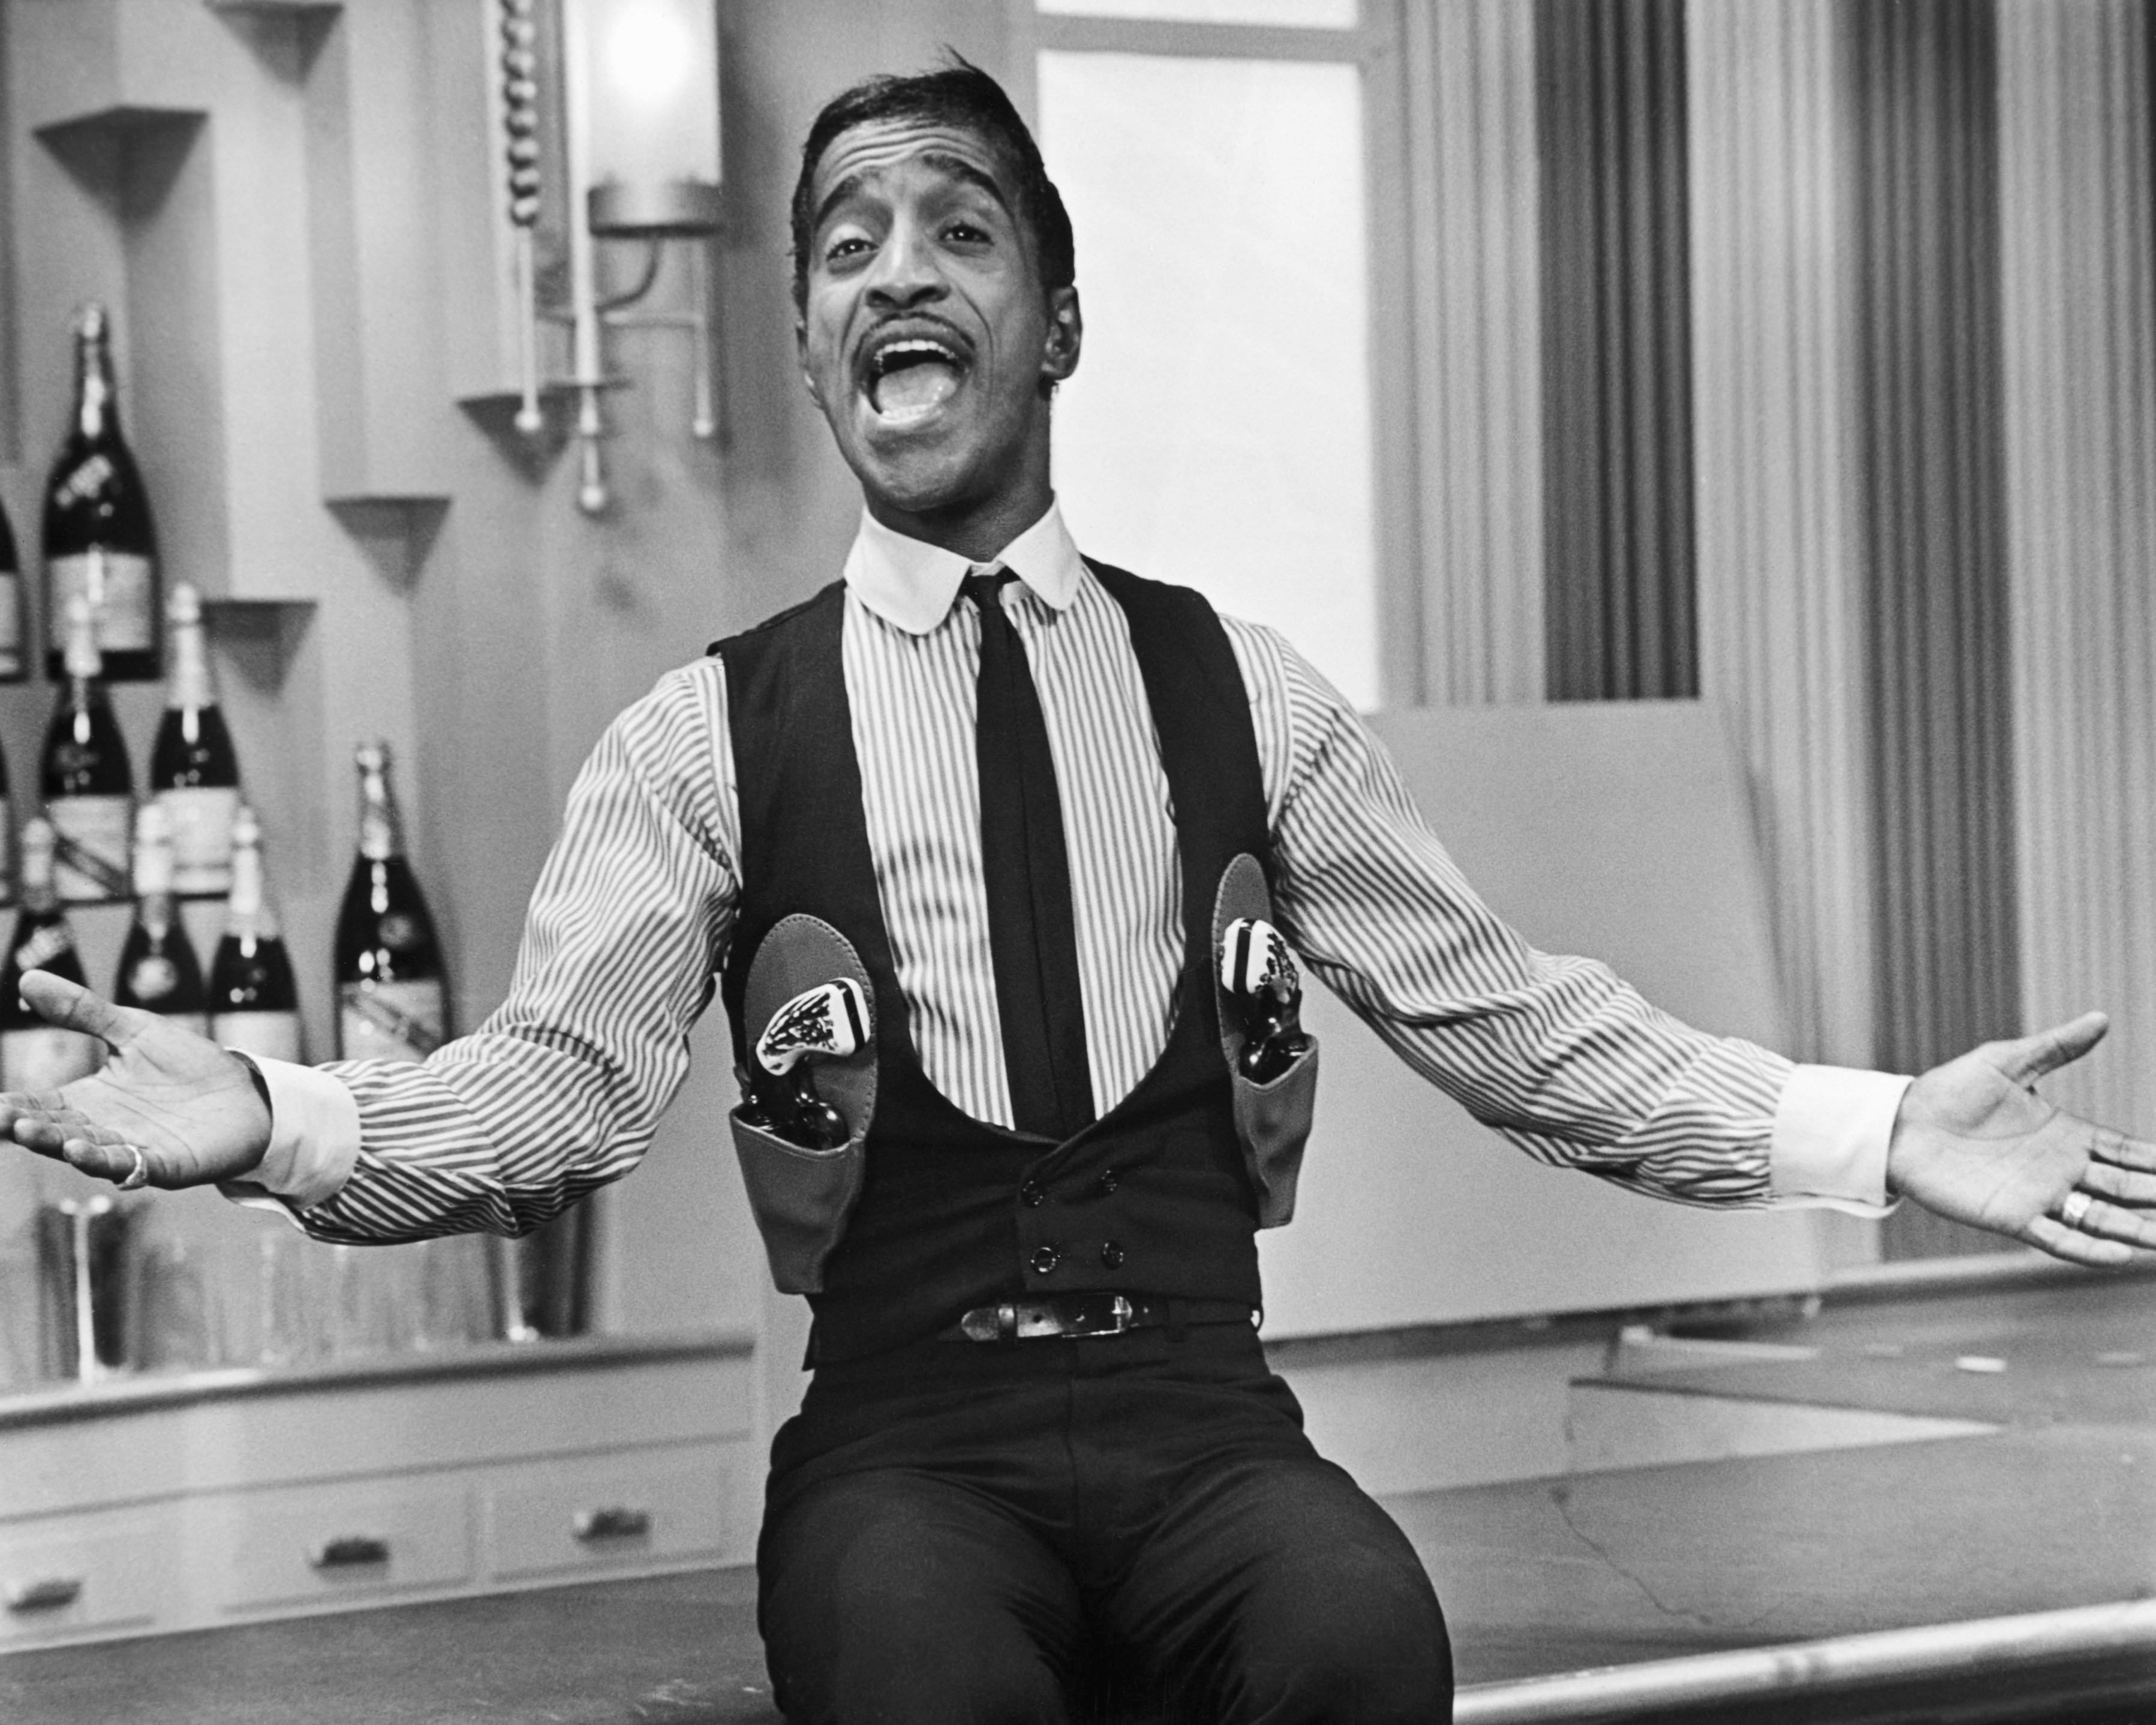 Picture shows legendary performer, Sammy Davis Jr., singing in a gun-slinger's outfit circa 1950s. | Source: Getty Images 